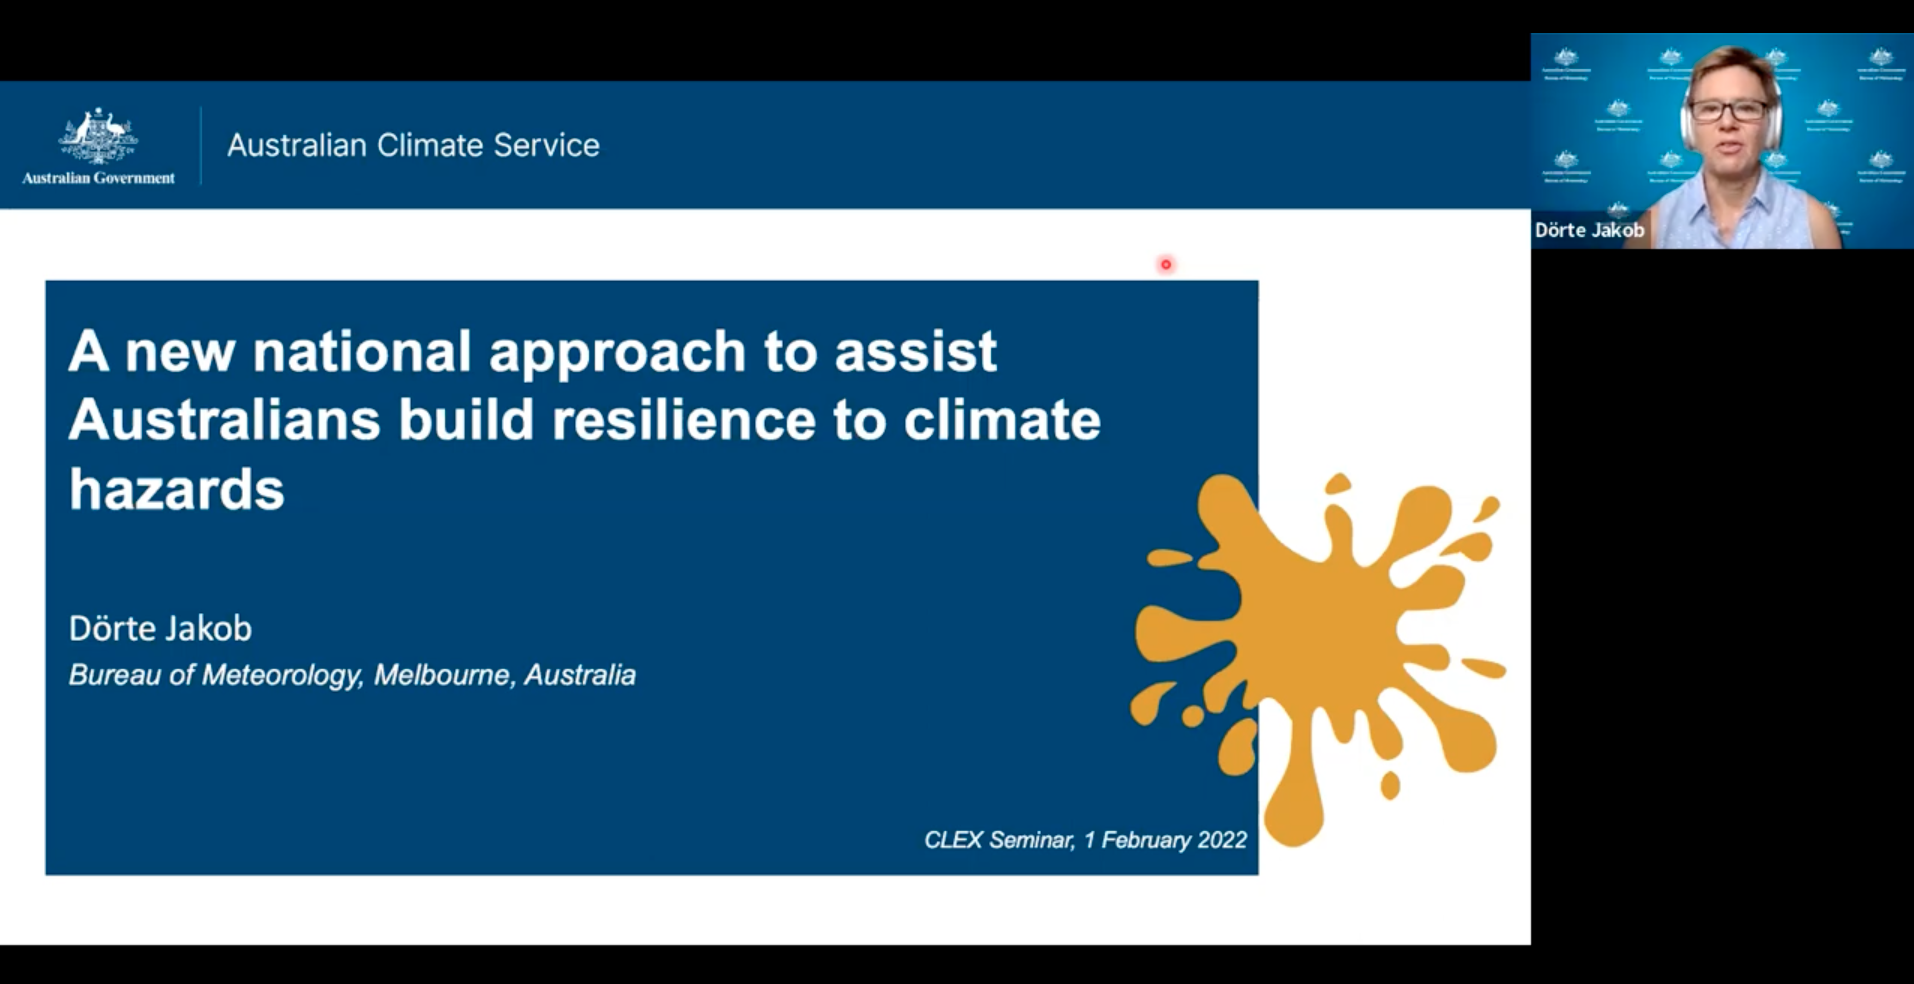 A new national approach to assist Australians to build resilience to climate hazards: Dr Dörte Jakob